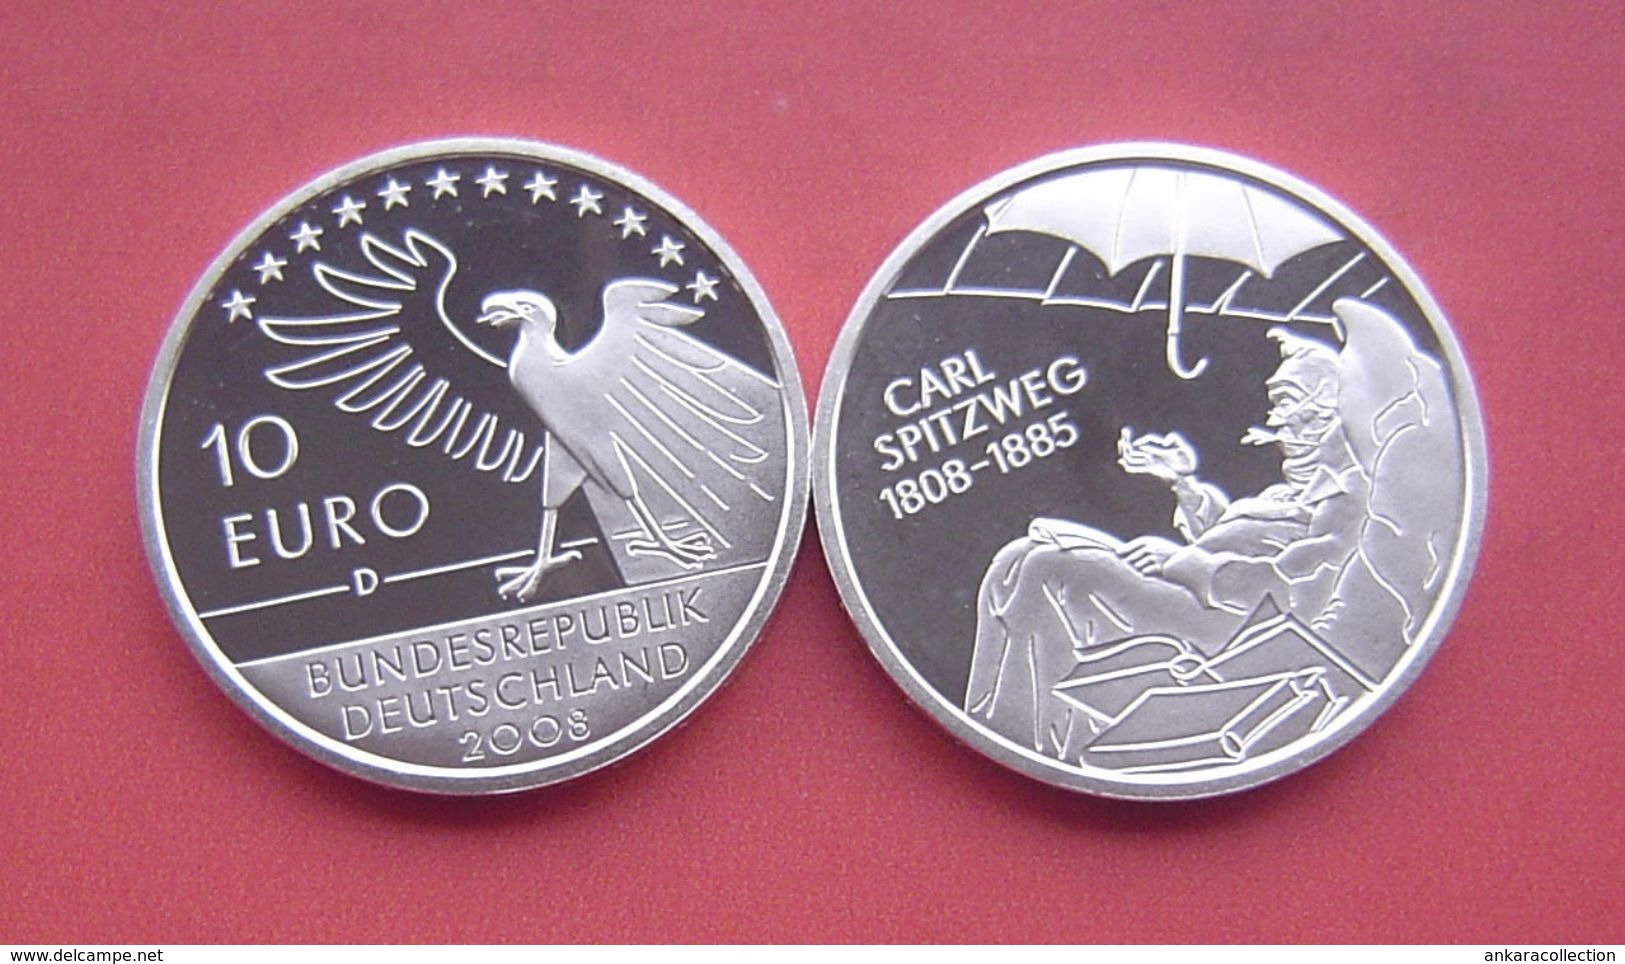 AC - GERMANY 200th BIRTH ANNIVERSARY OF CARL SPITZWEG 2008 - D 10 EURO COMMEMORATIVE SILVER COIN PROOF UNCIRCULATED - Verzamelingen